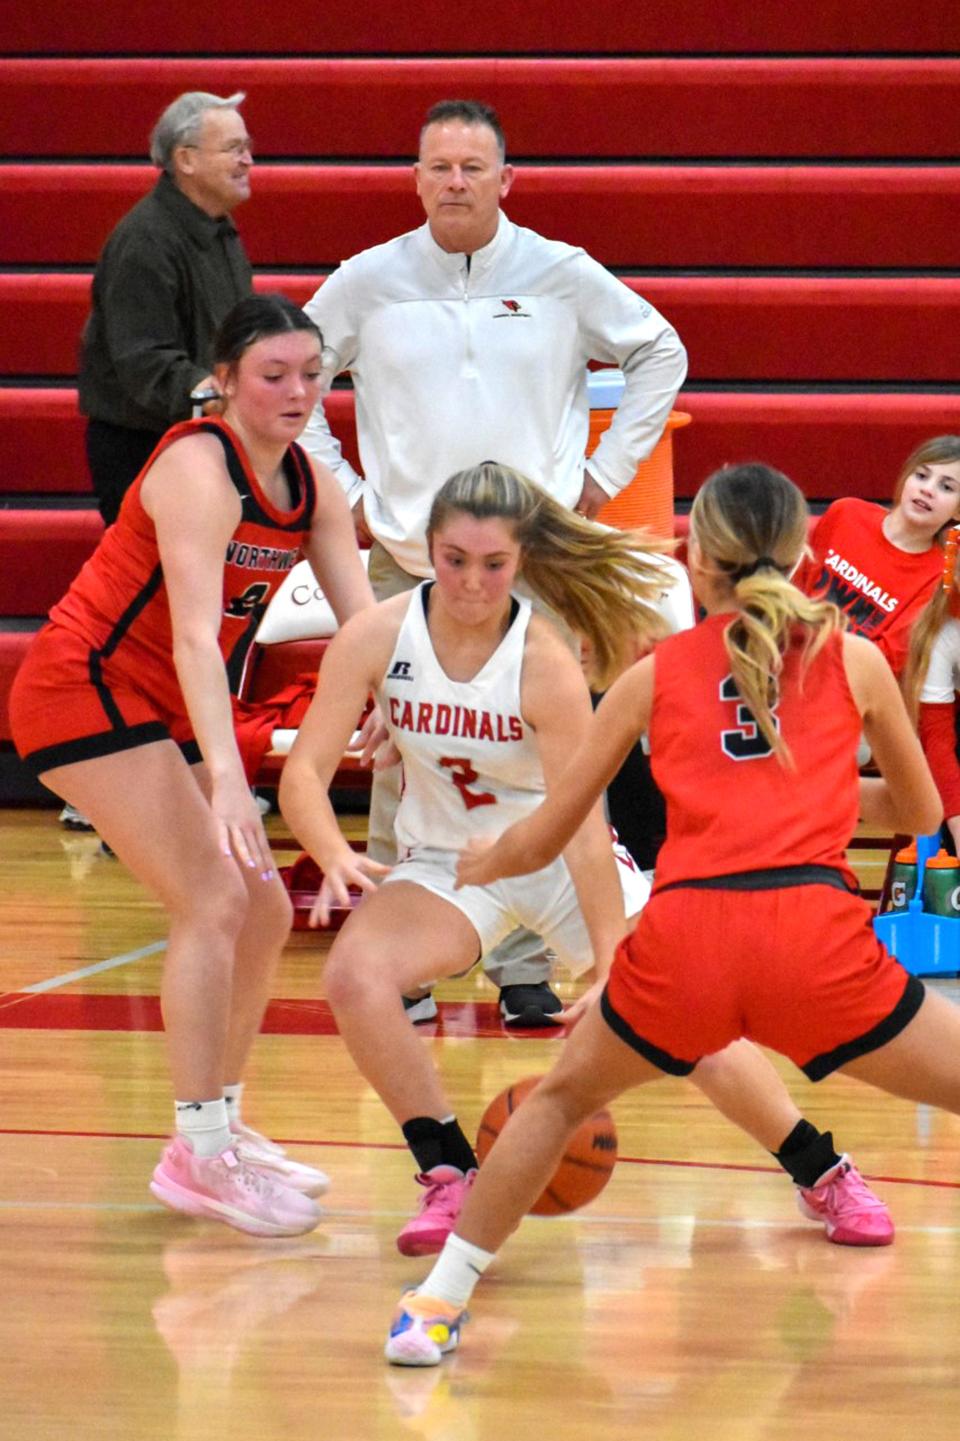 Coldwater's Rylie Van Aken splits a Northwest double team as head coach Ken Smoker and the managers look on Tuesday night.